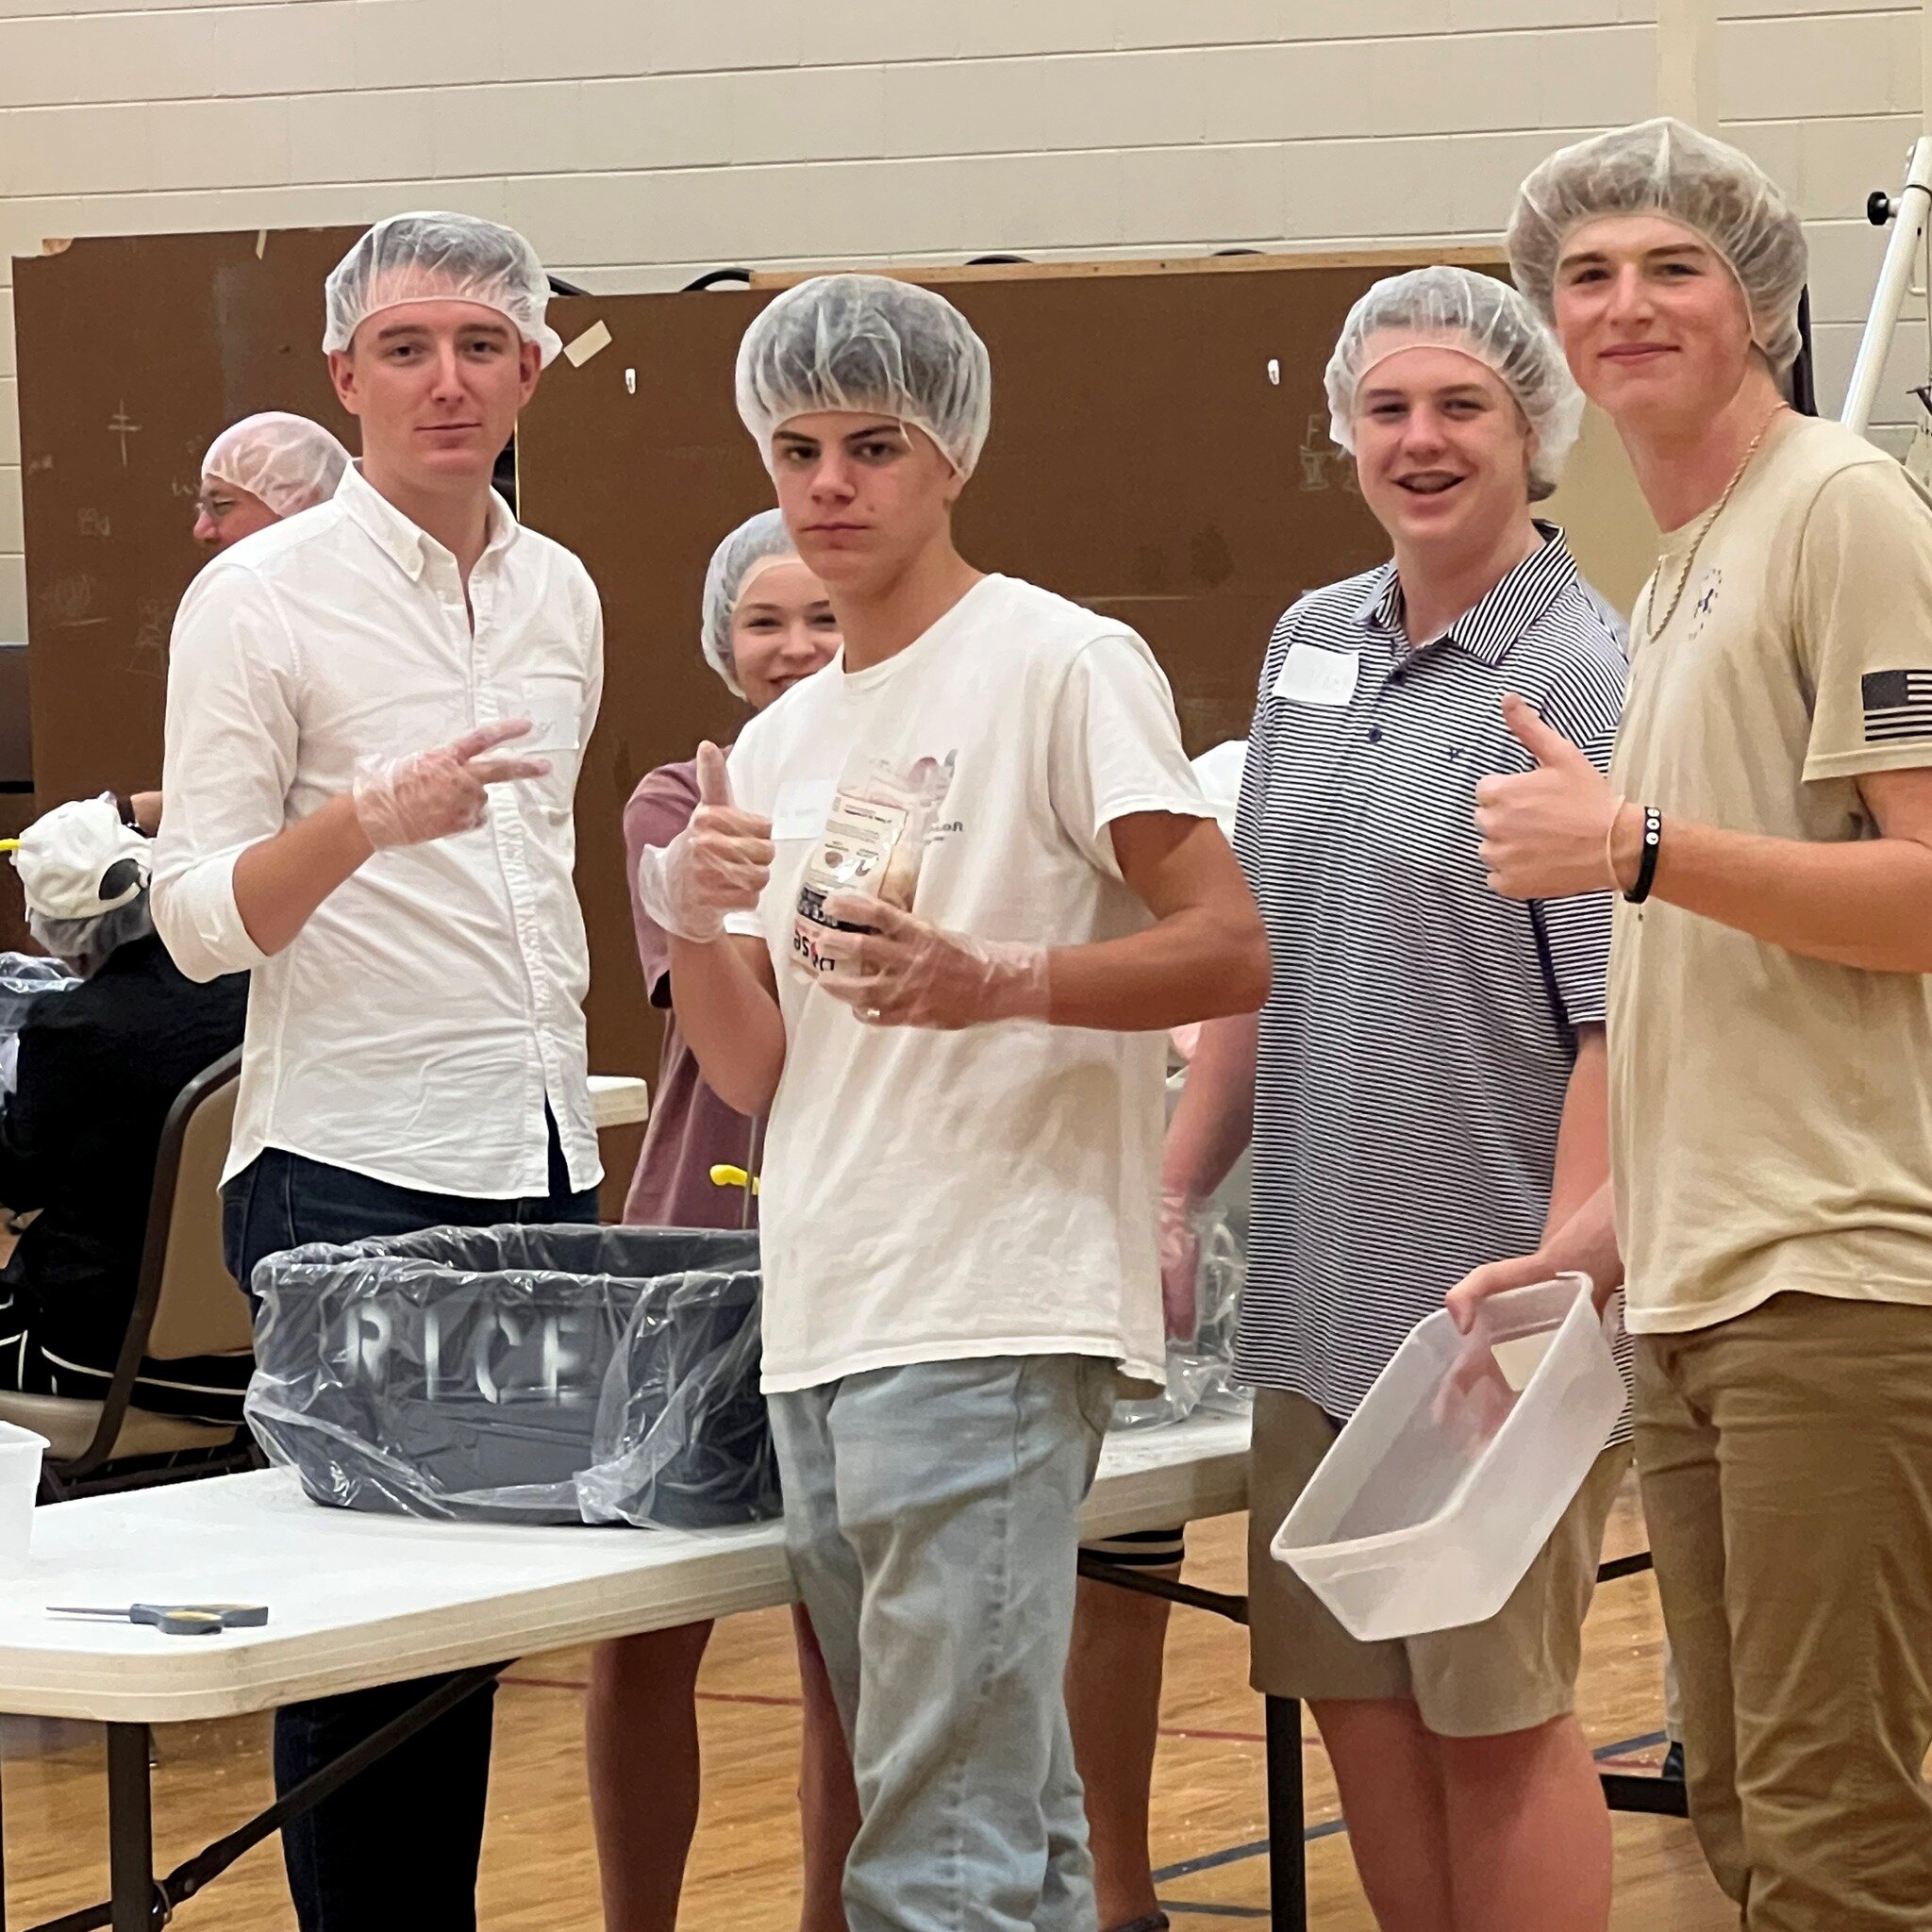 Grateful for all of the people that volunteered their time to pack 15,000 meals.
Thankful for the tremendous organization Rise Against Hunger that provides us the opportunity to serve those in need.
Hopeful to see you all there next year!
#mission  #